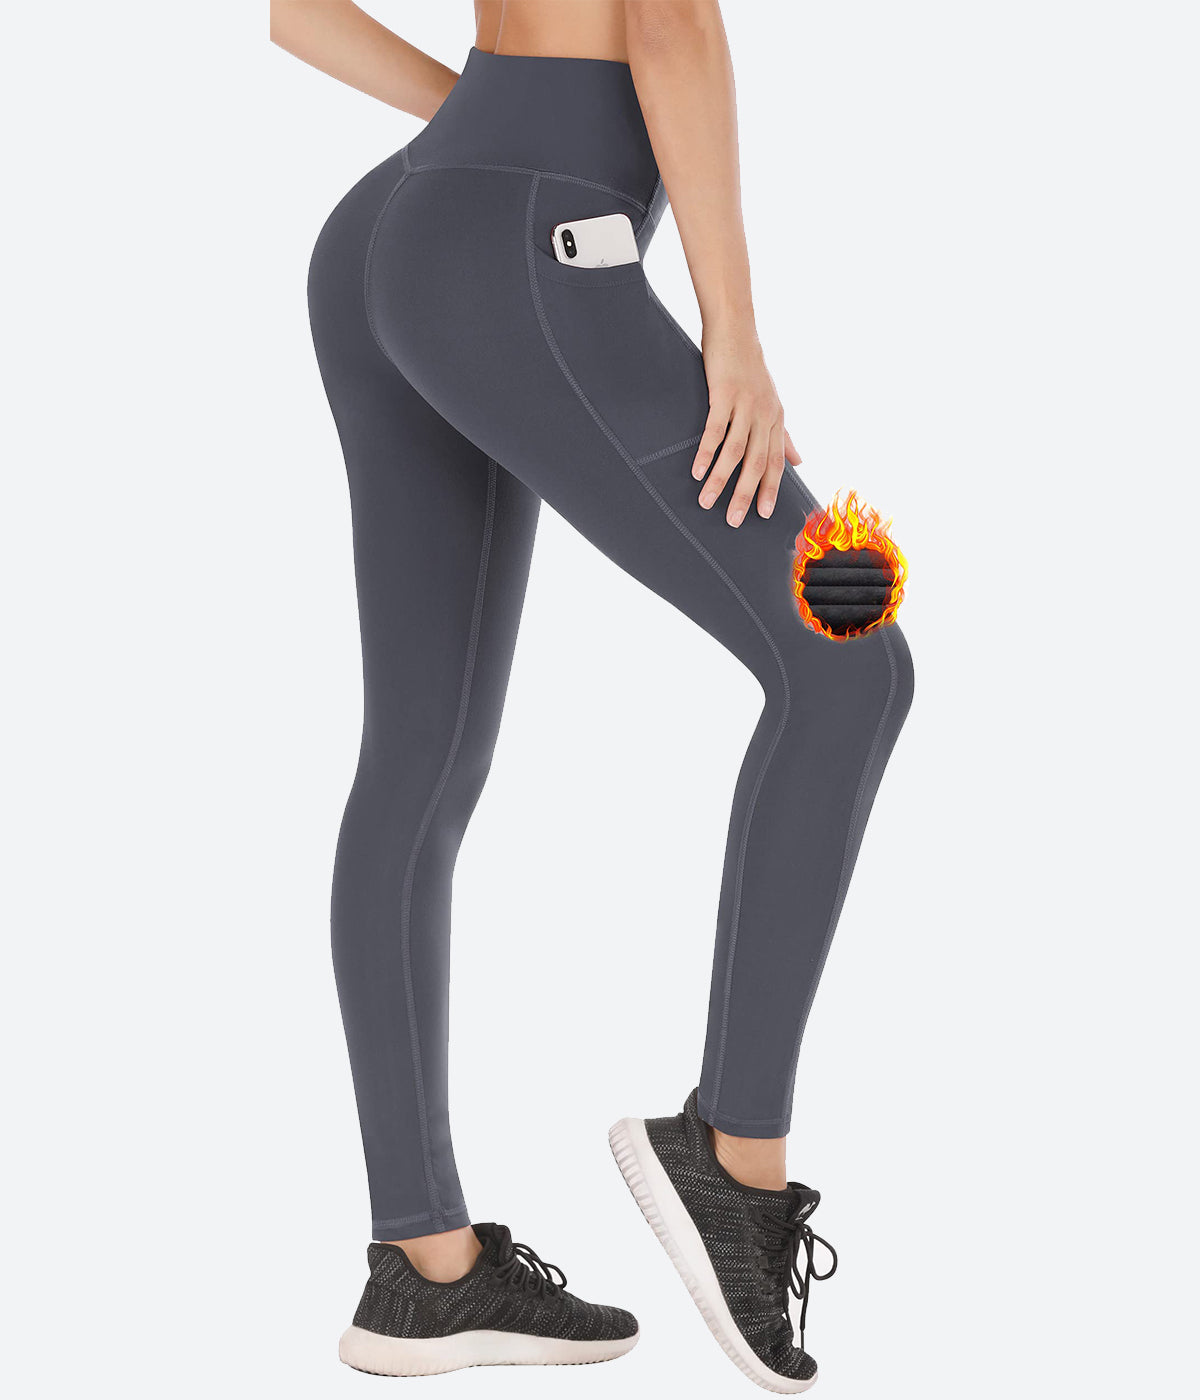 IUGA Fleece Lined Thermal Bootcut Yoga Pants for Women with Pockets